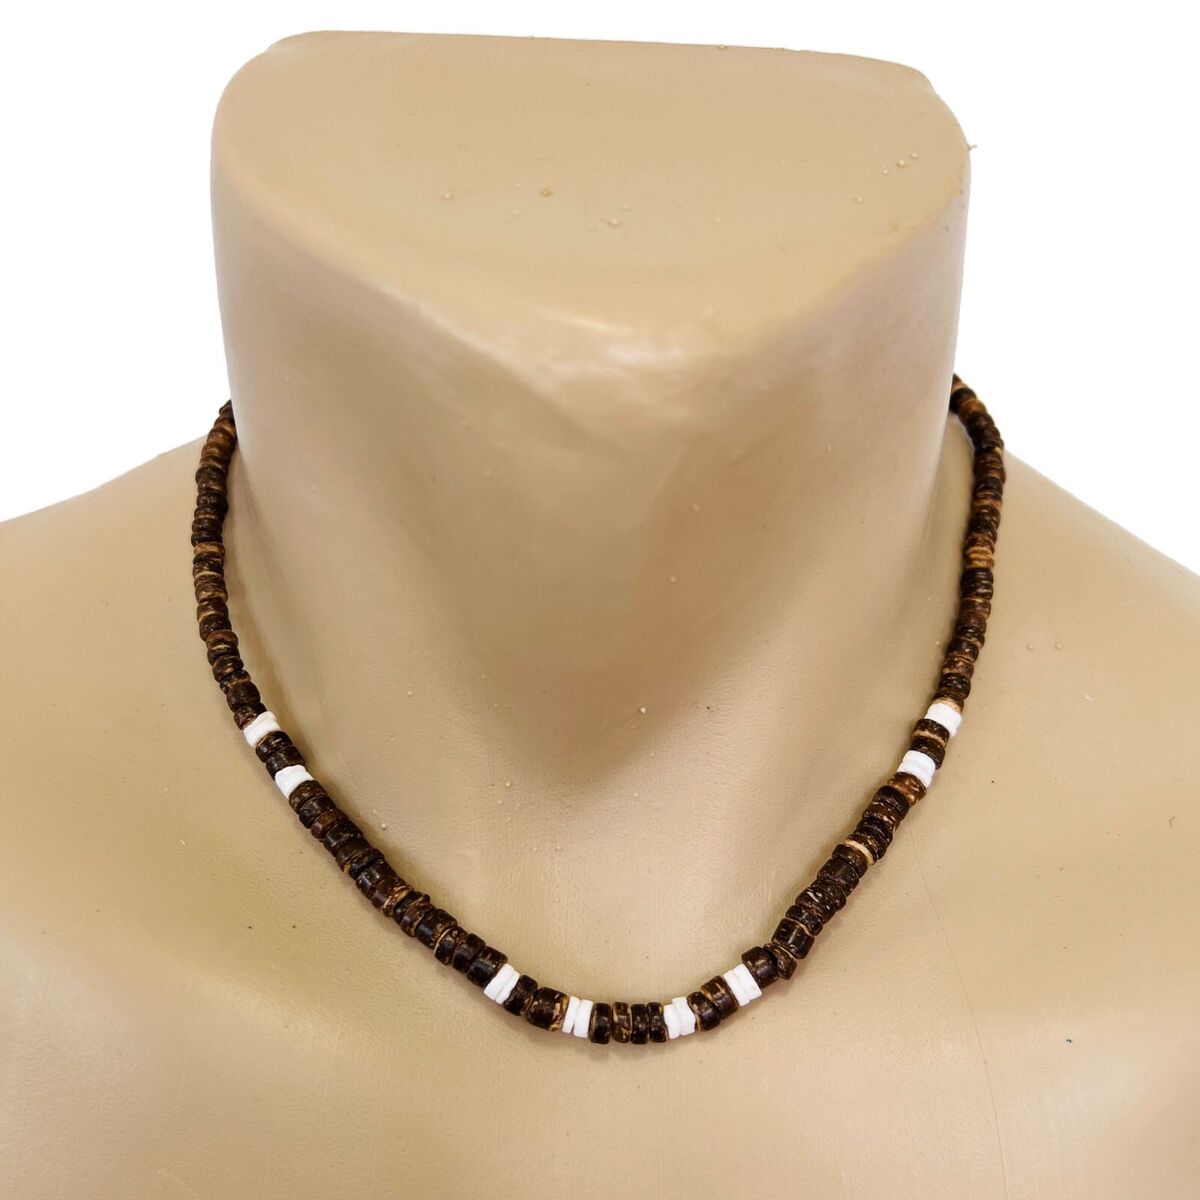 Beach Hot Extreme Black & Chrome Men's Beaded Necklace, Surfer Style